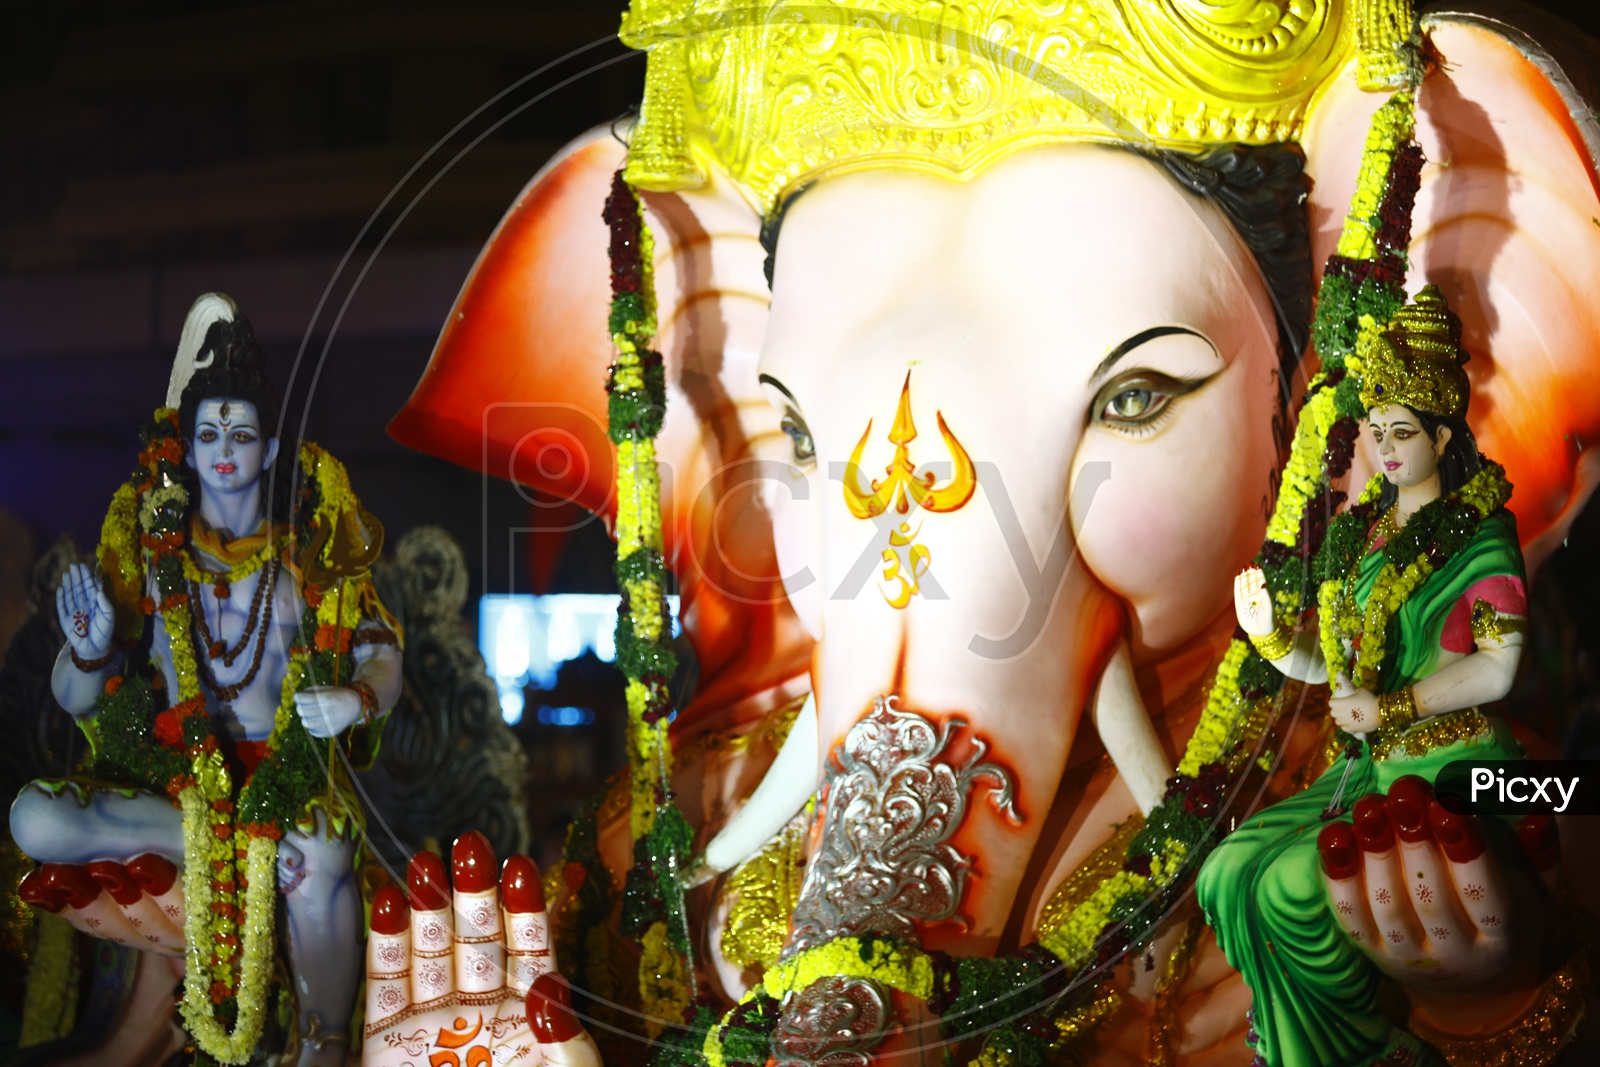 Lord Ganesh Idol in Procession During Immersion or Visarjan